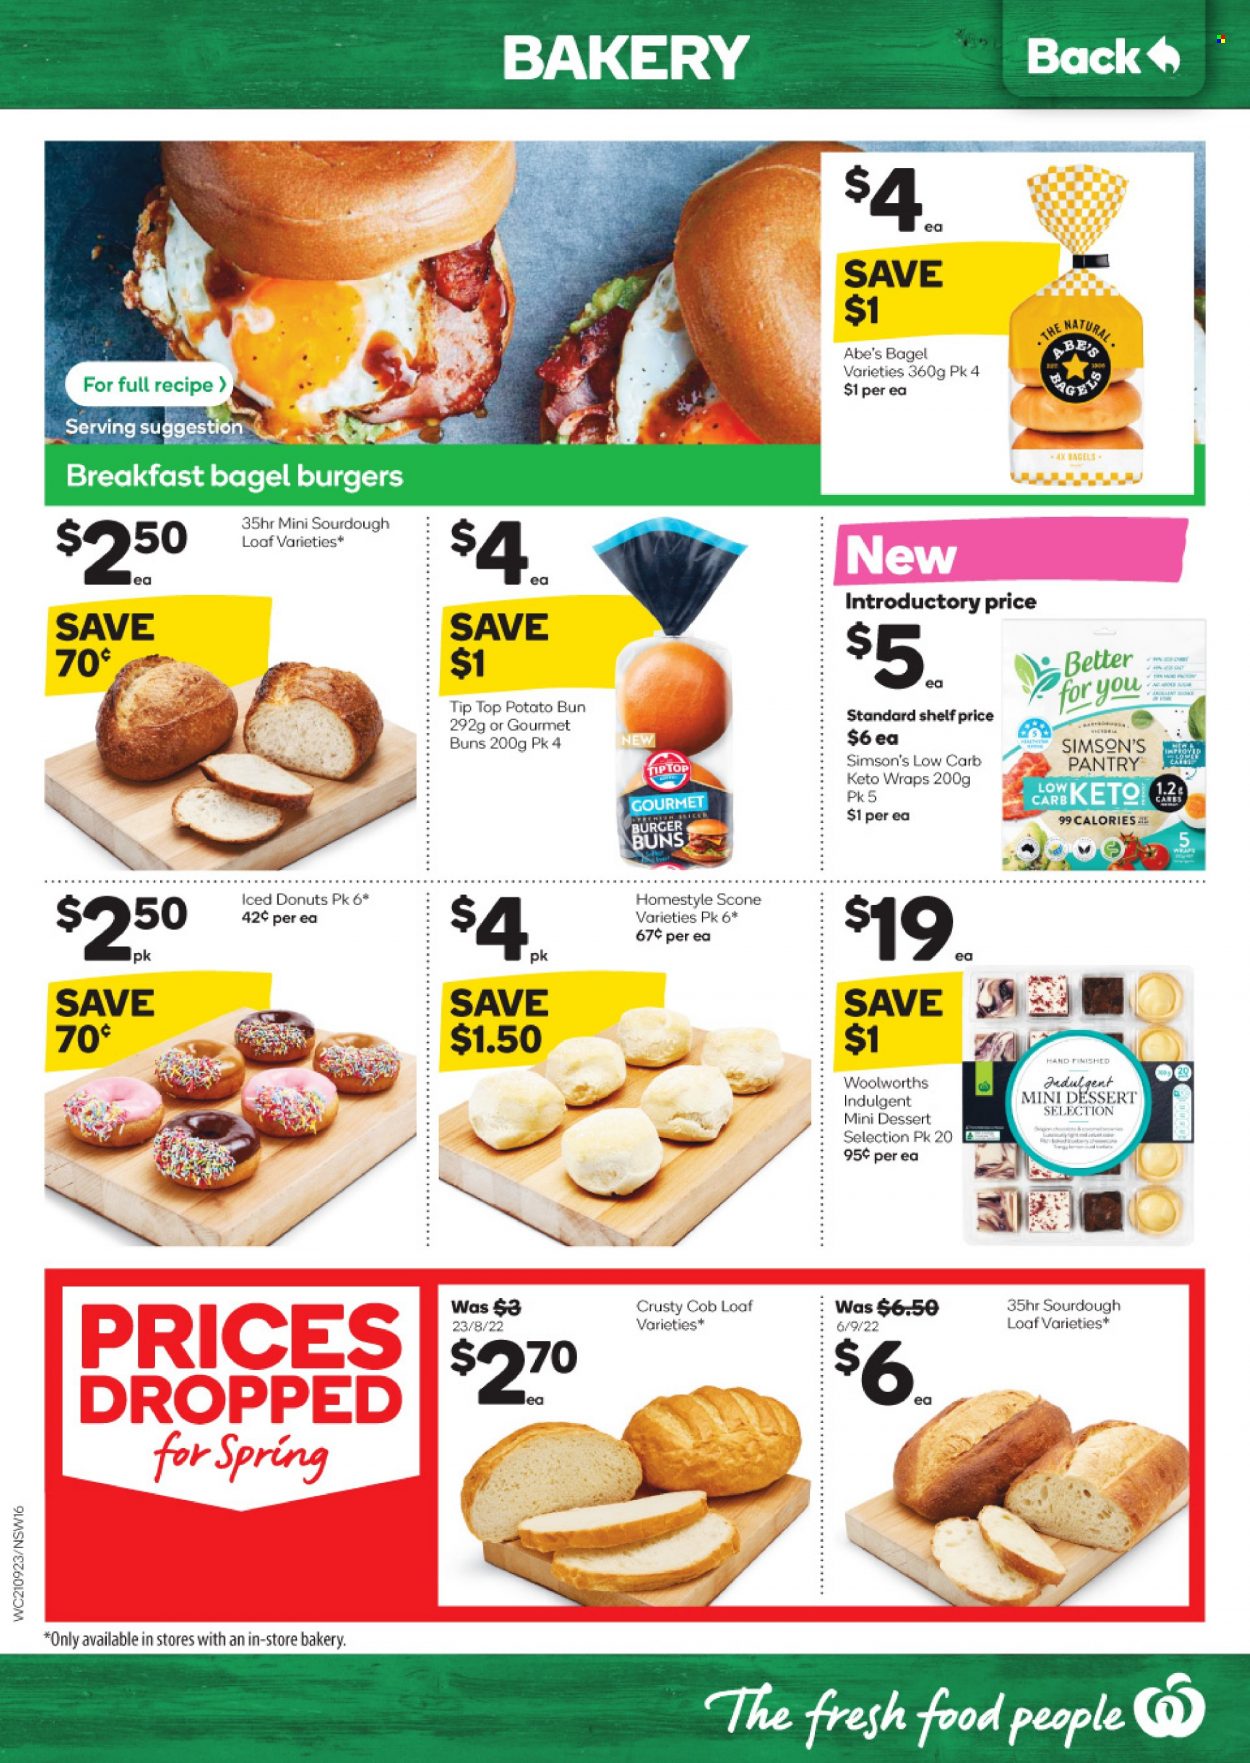 Woolworths catalogue - 21.9.2022 - 27.9.2022.